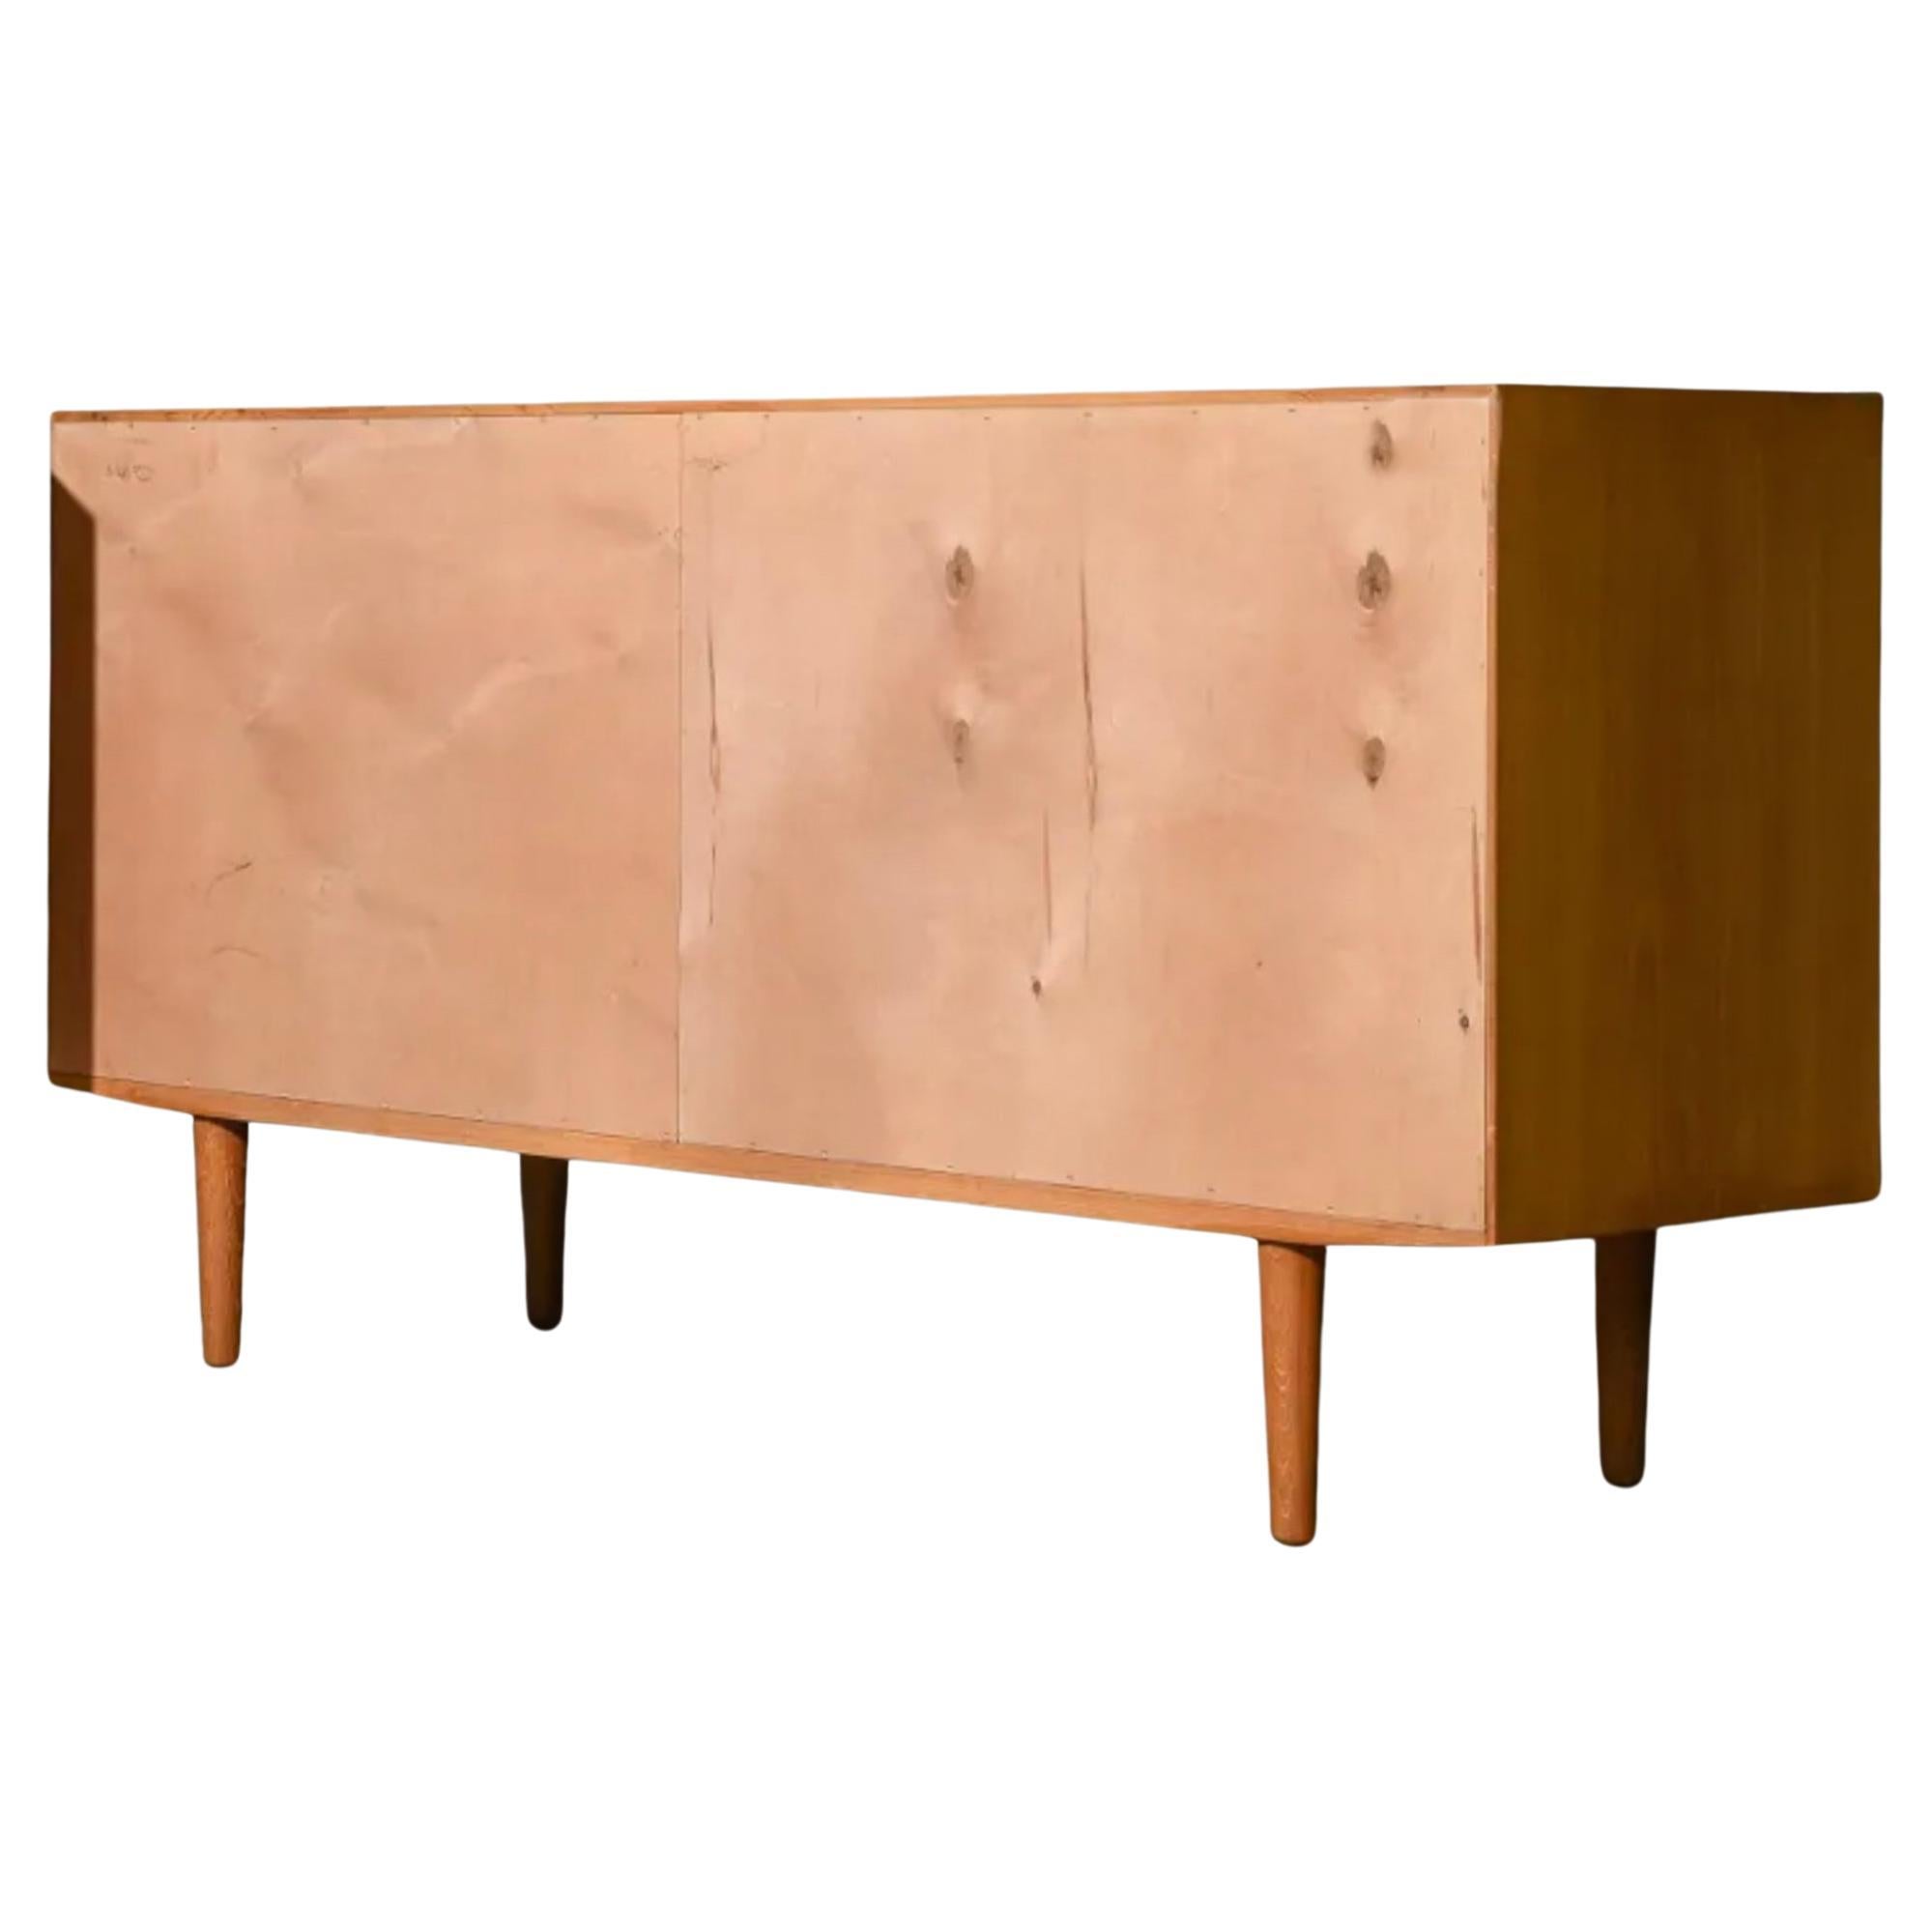 Midcentury Danish modern teak sliding door credenza. Has 2 front sliding doors with rounded carved teak handles. Has 2 adjustable shelves w/pins in each section. Labeled Danish Control inside. Good excellent condition inside and out. Sits on 4 solid